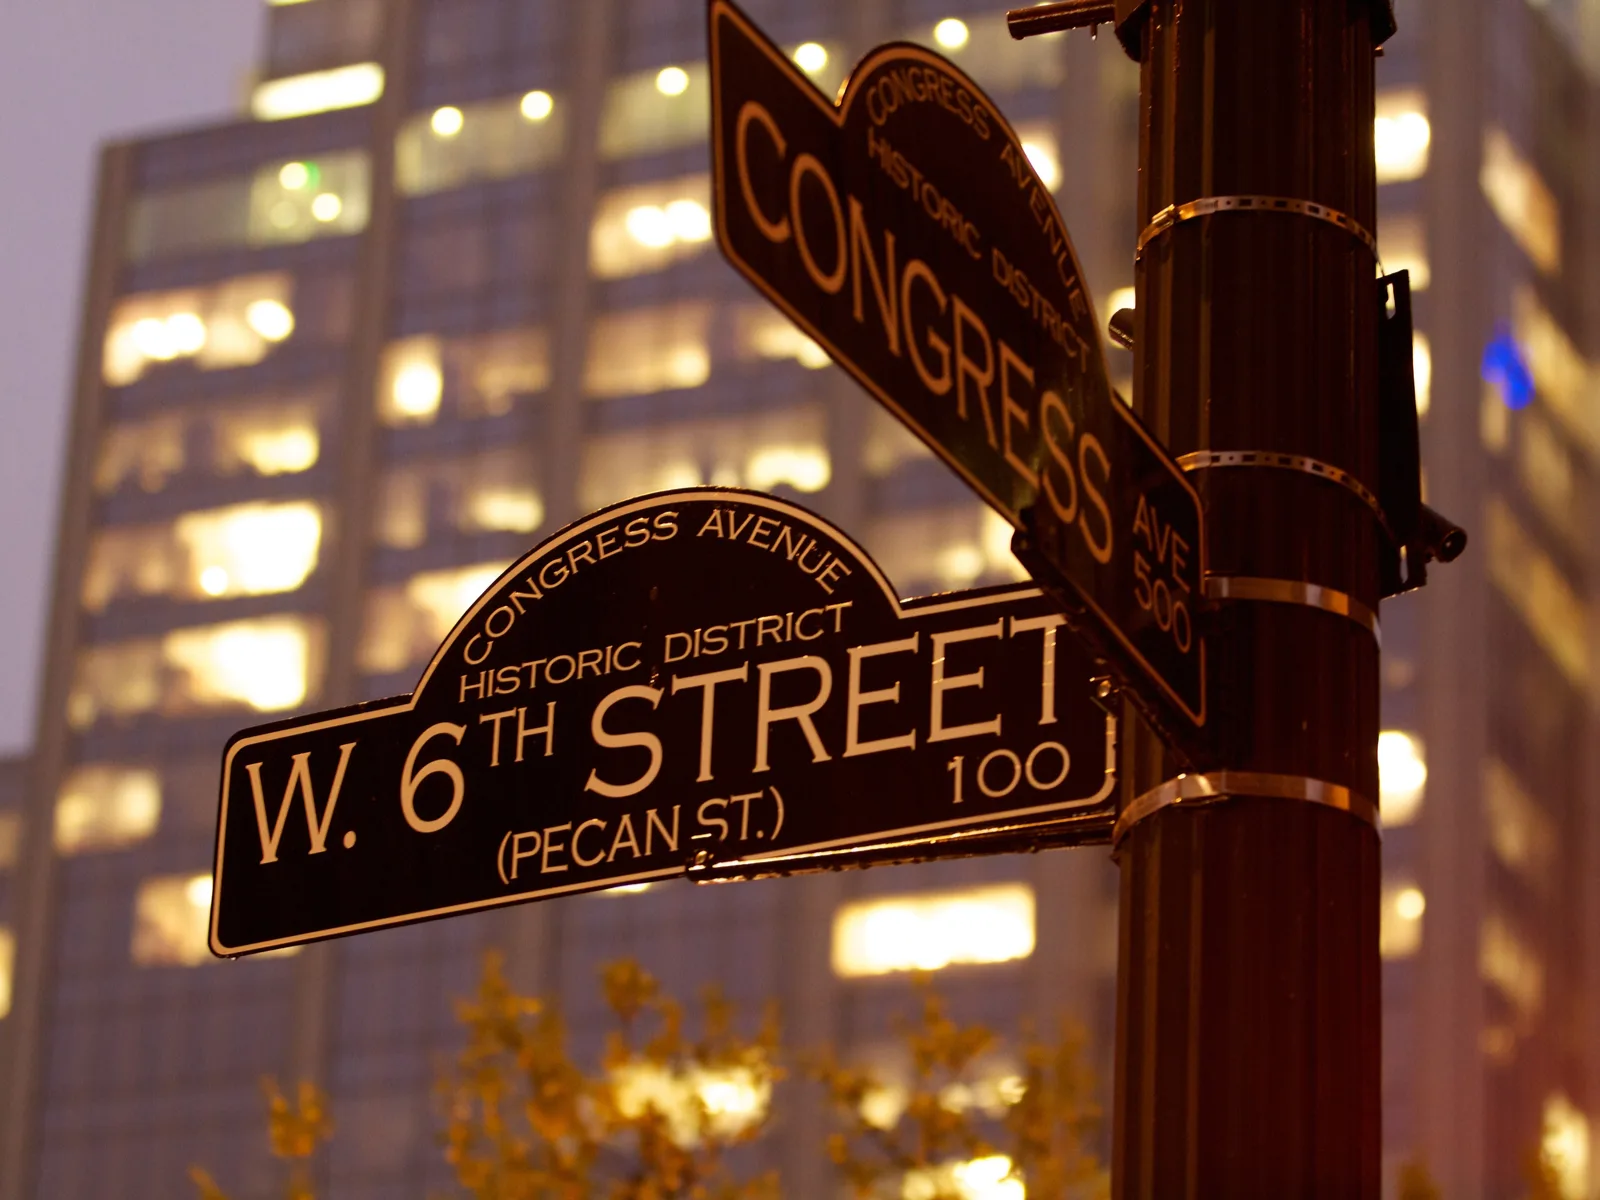 Street sign in Austin Texas showing the corner of W 6th and Congress Ave